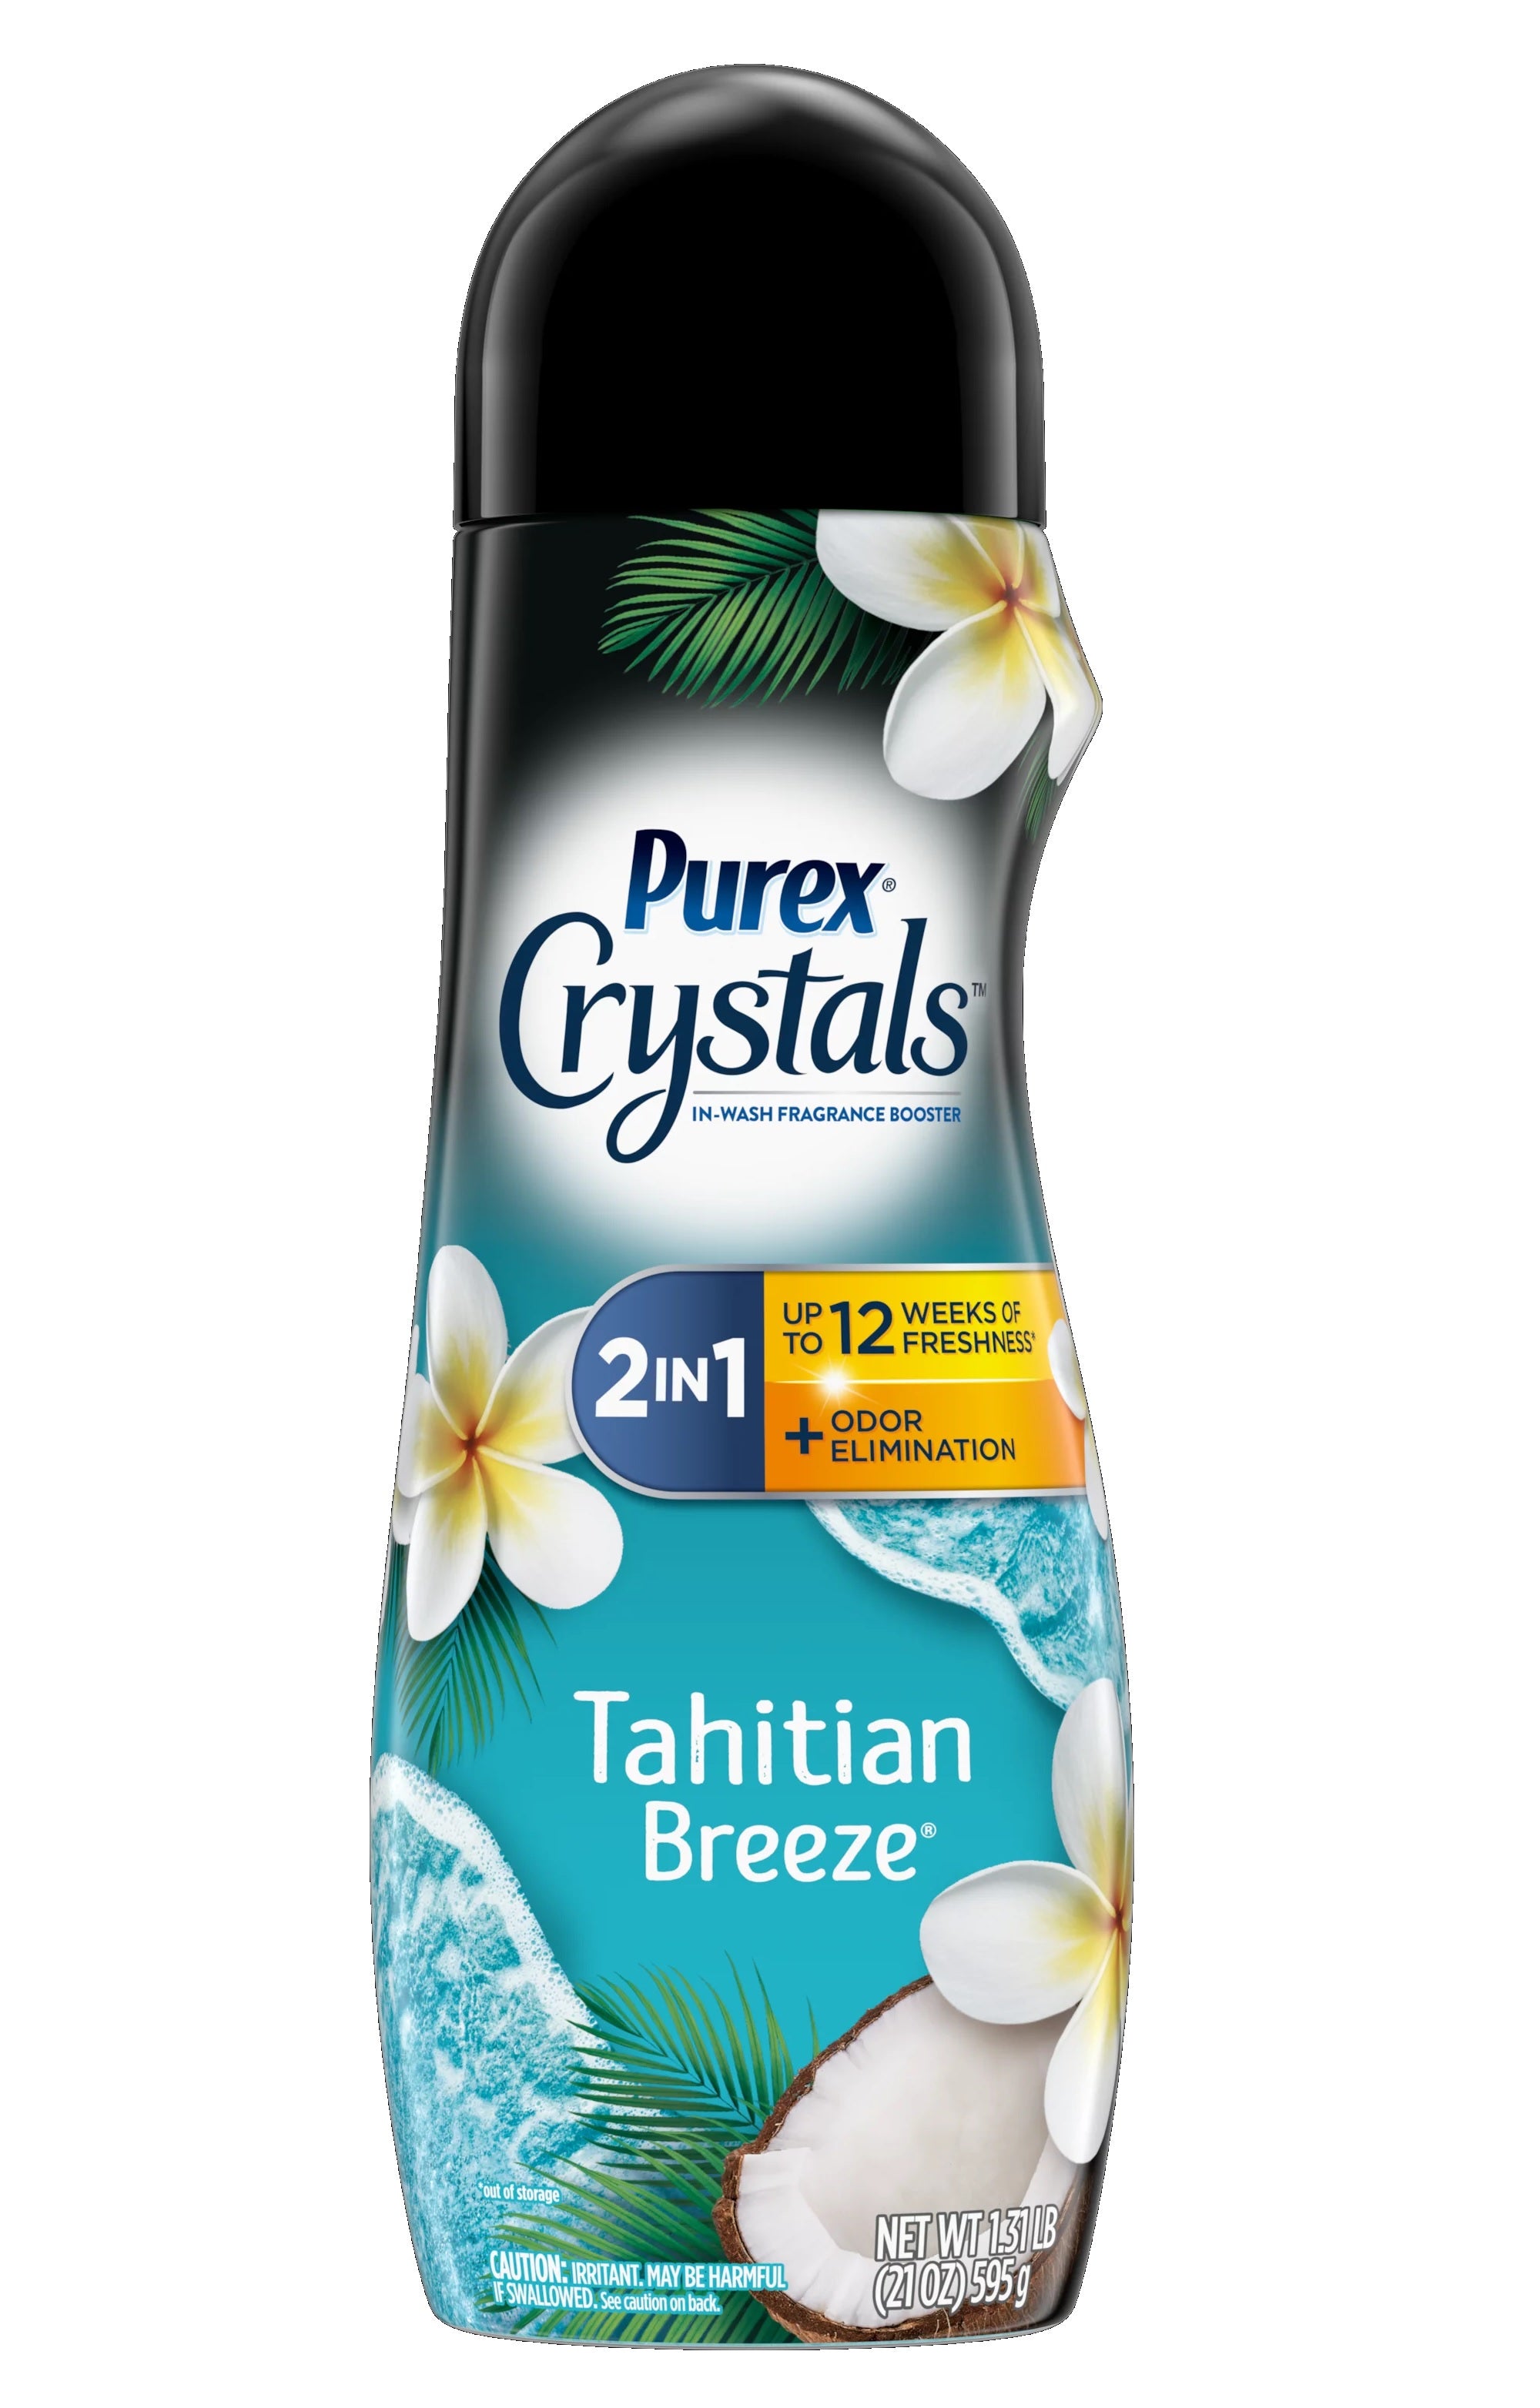 Purex Crystals In-Wash Fragrance and Scent Booster, Aromatherapy Tahitian Breeze Shaker - 21oz/4pk